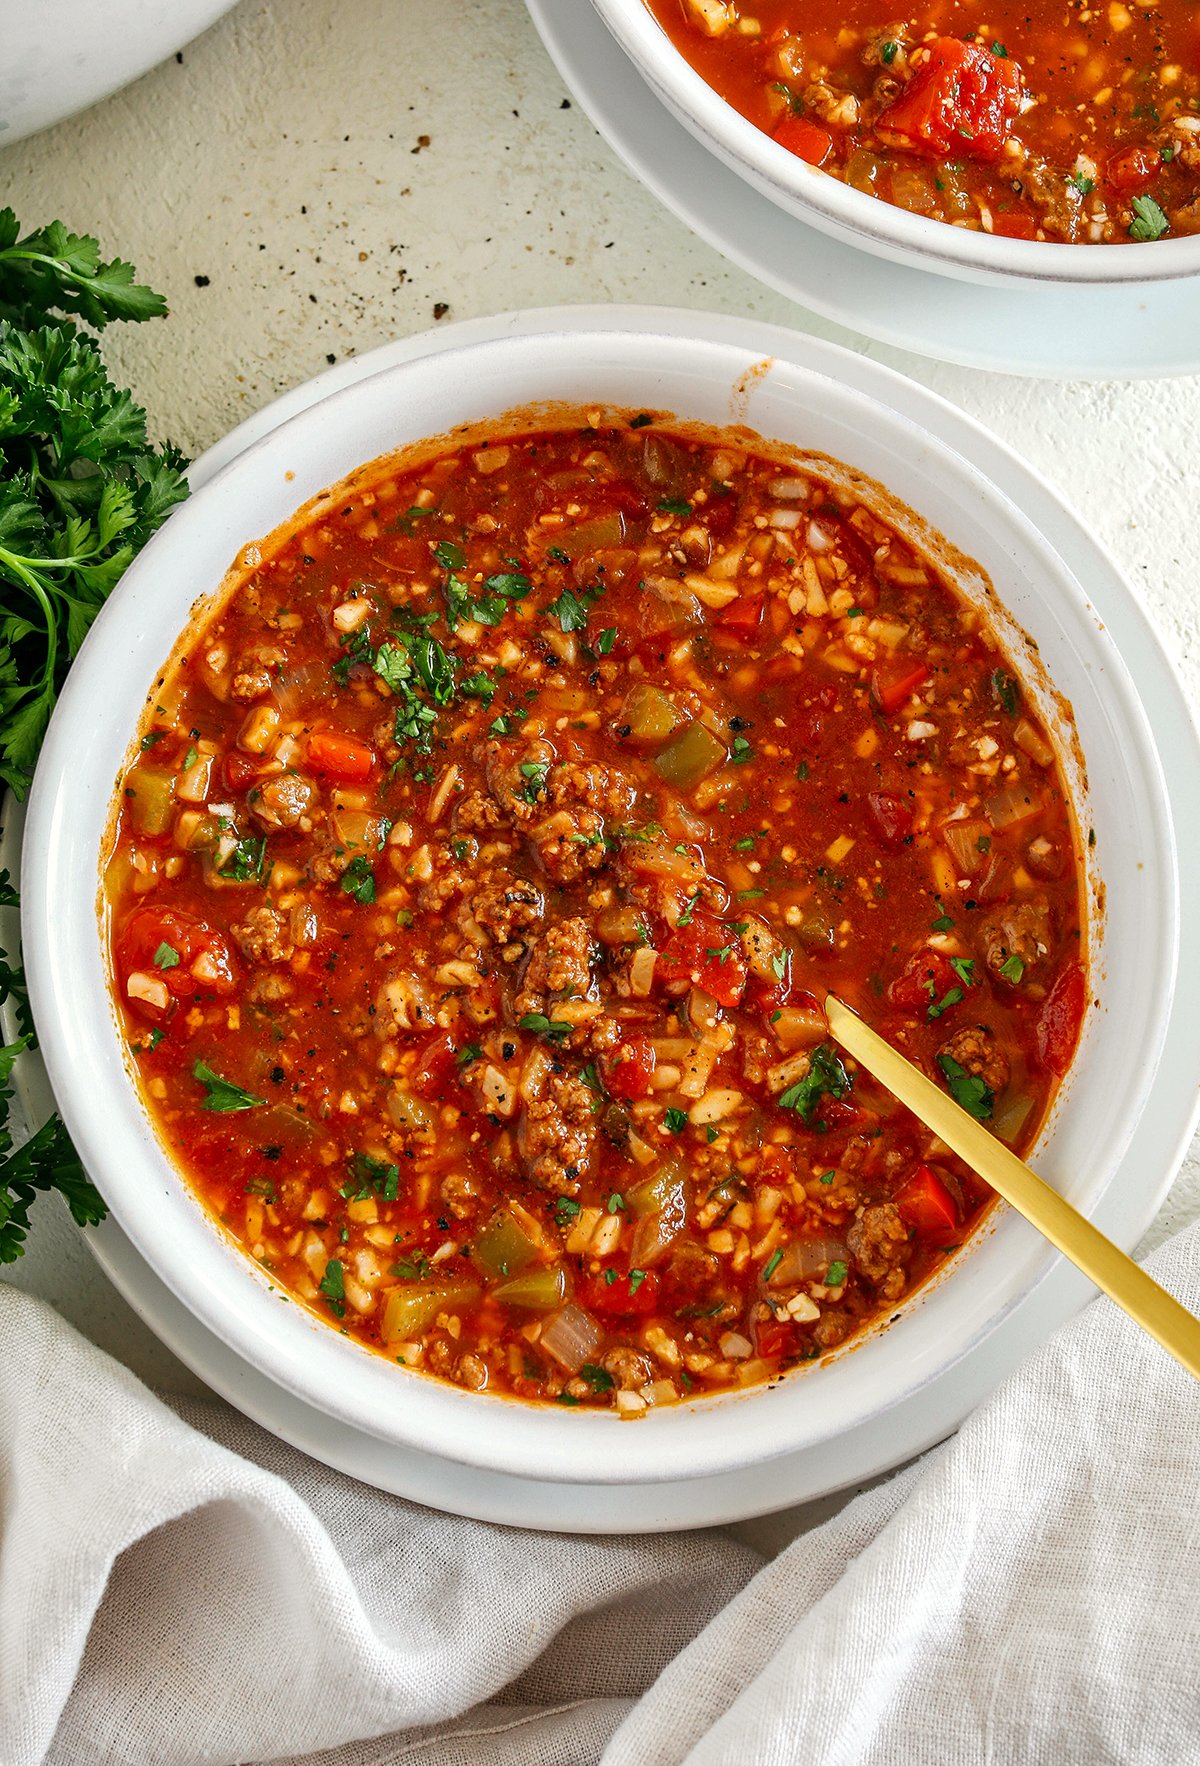 This hearty Stuffed Pepper Soup is loaded with seasoned ground beef colorful bell peppers onion and cauliflower rice all simmered in a flavorful broth for a delicious one pot meal the whole family will love